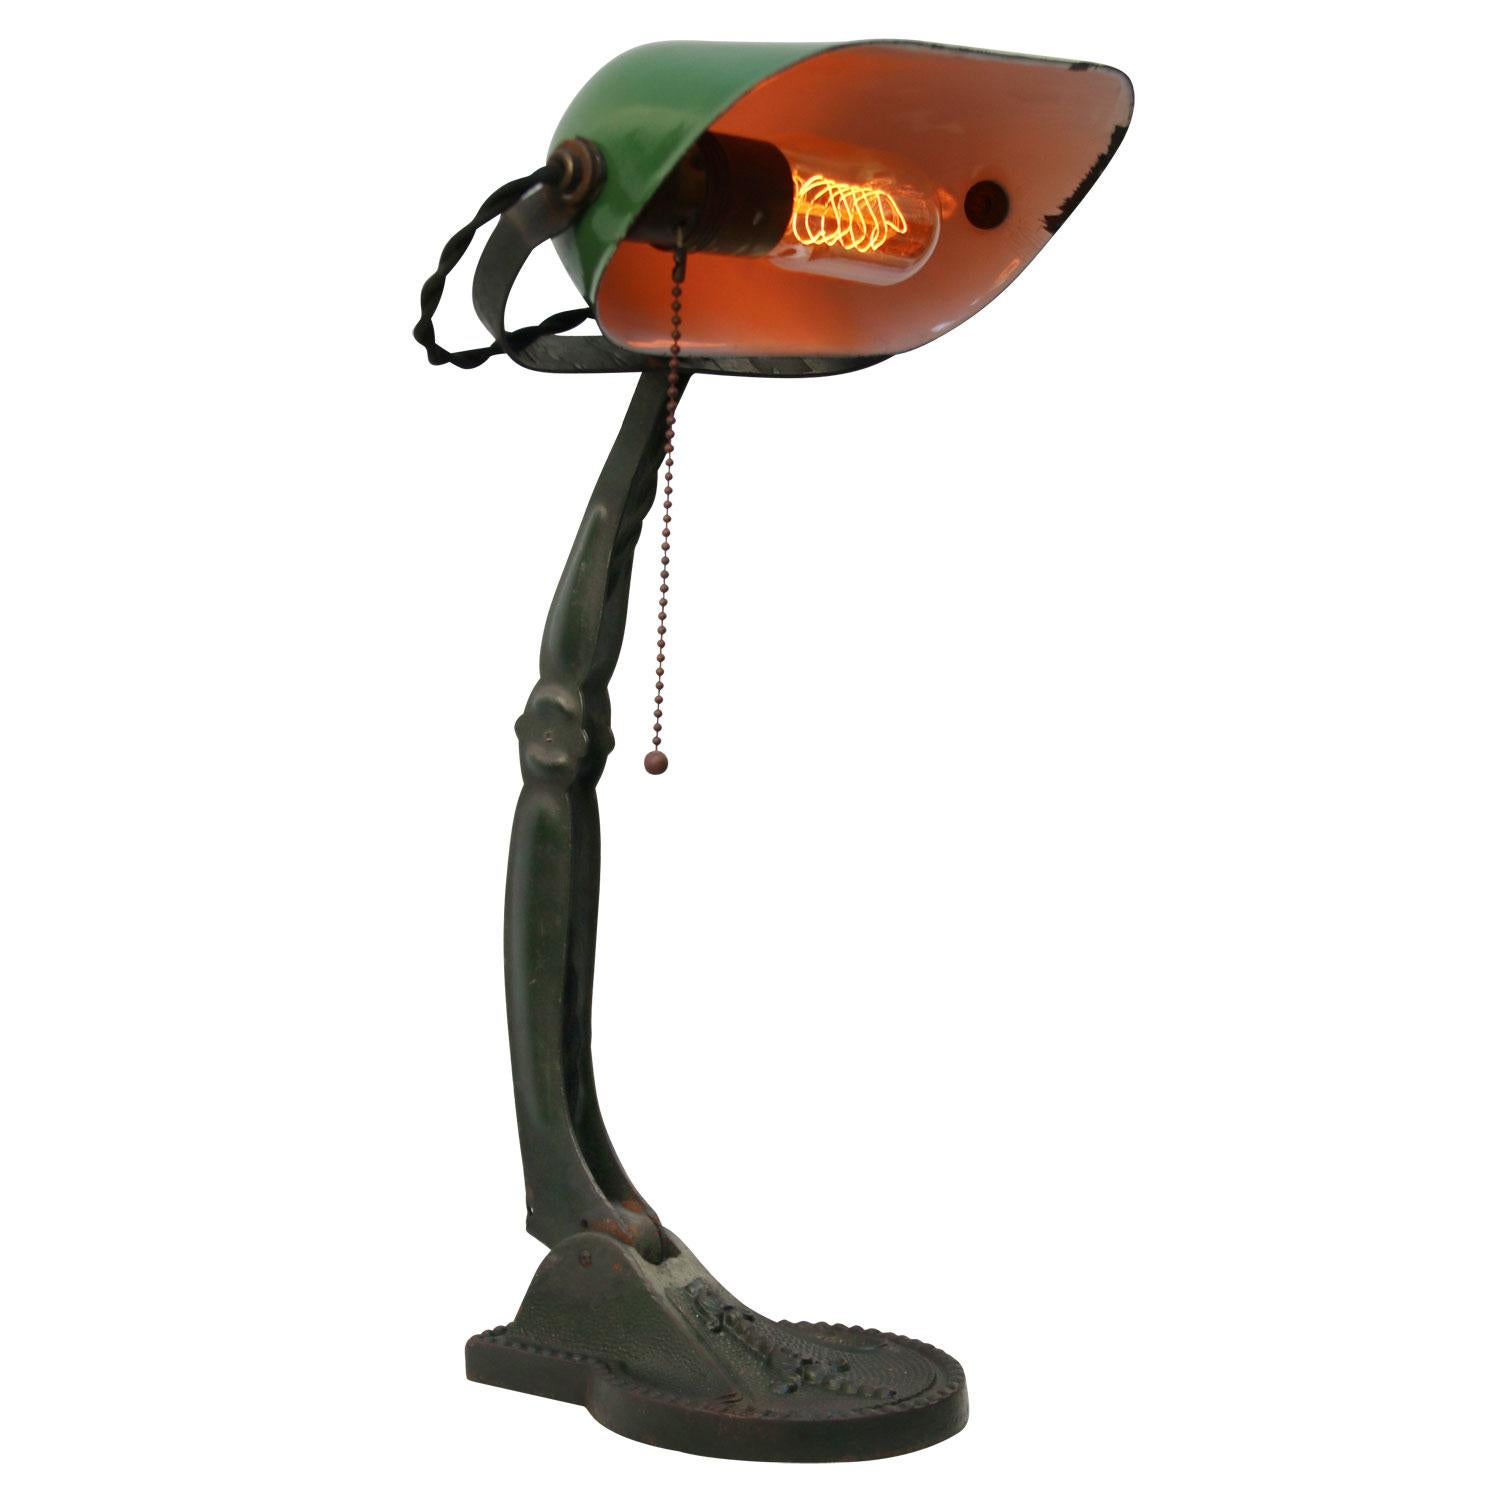 Hungarian green enamel desk light
2.5 meter black cotton flex, plug and pul switch

Also available with US/UK plug

Weight: 2.30 kg / 5.1 lb

Priced per individual item. All lamps have been made suitable by international standards for